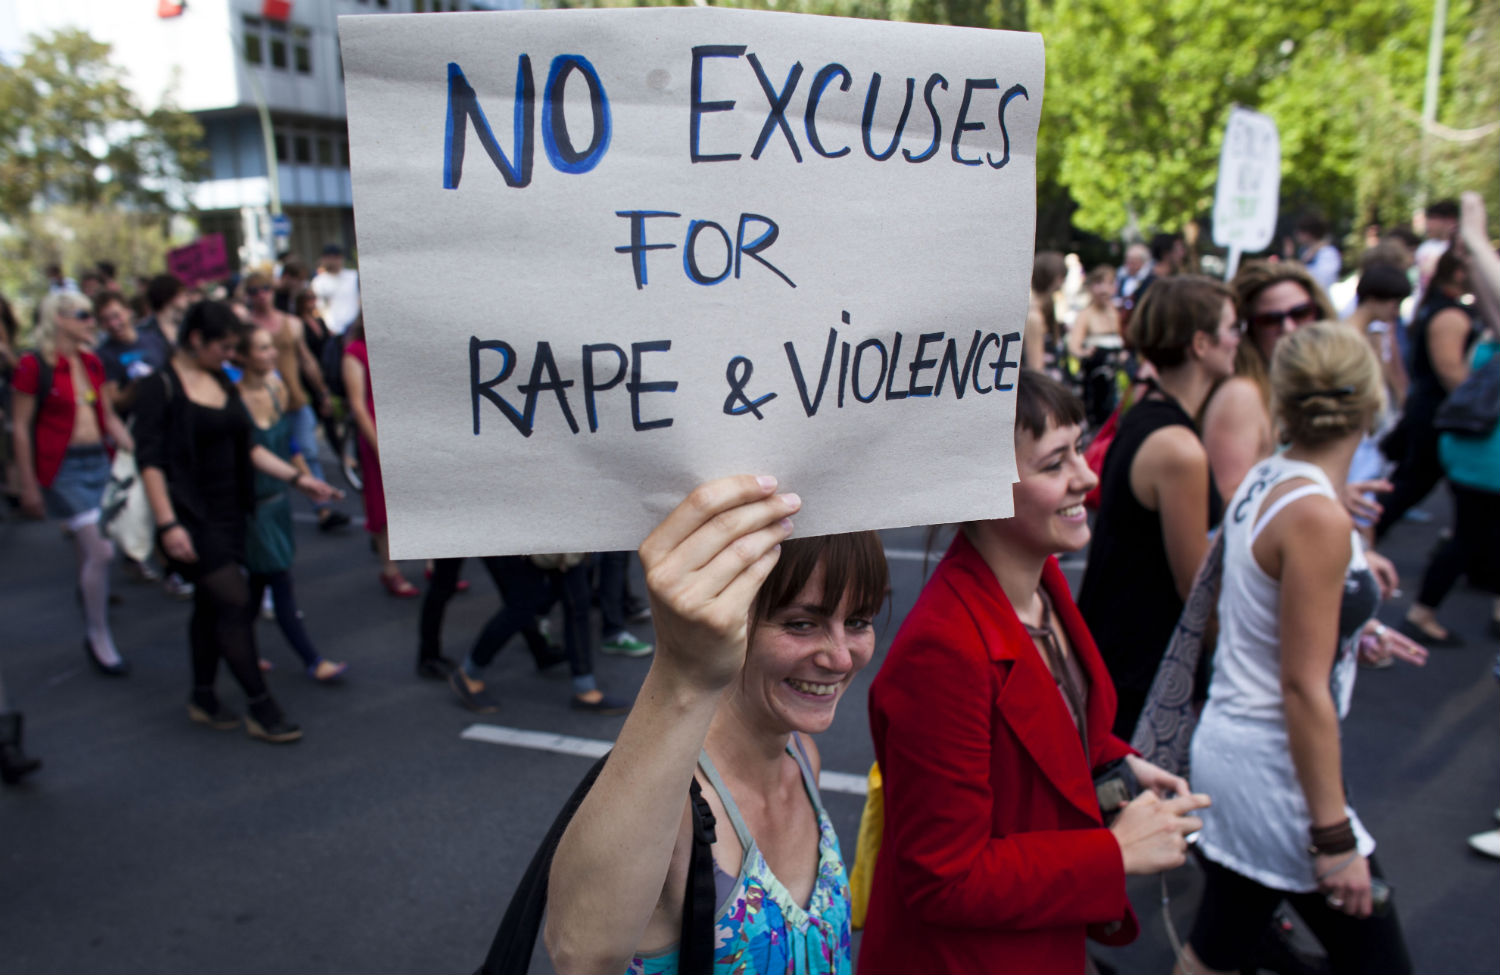 Questions About California’s New Campus Rape Law